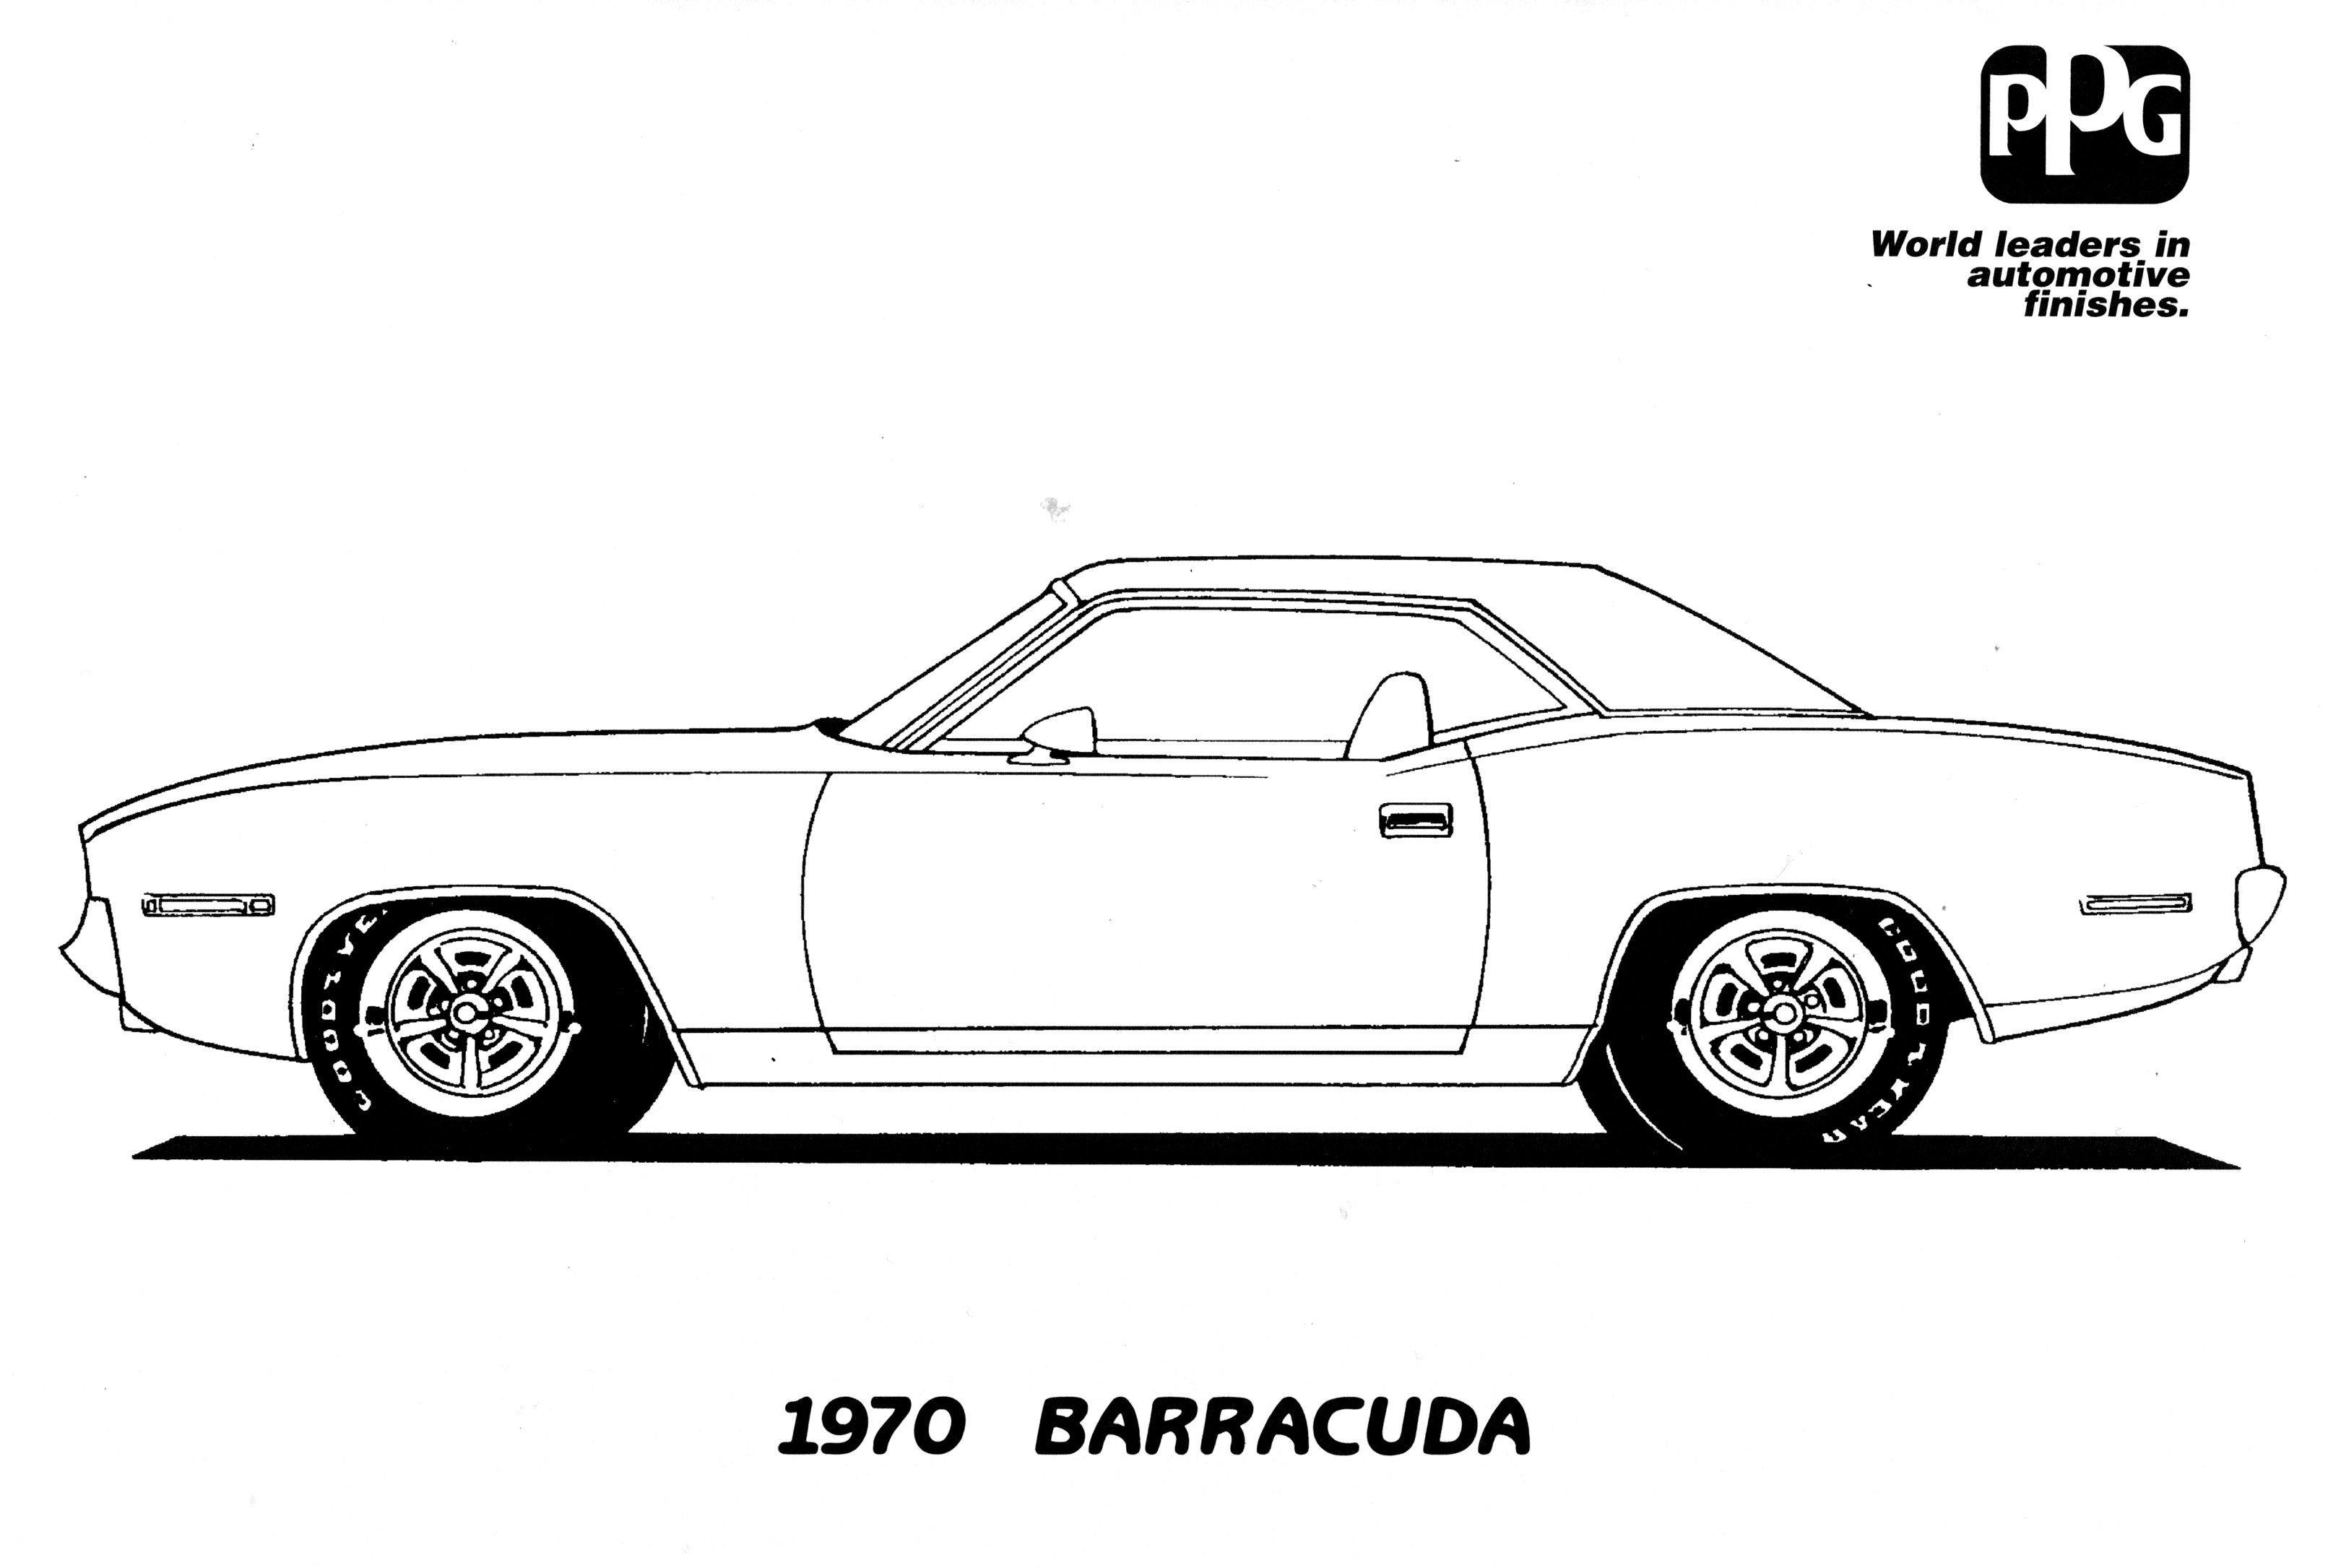 Muscle car coloring pages to download and print for free